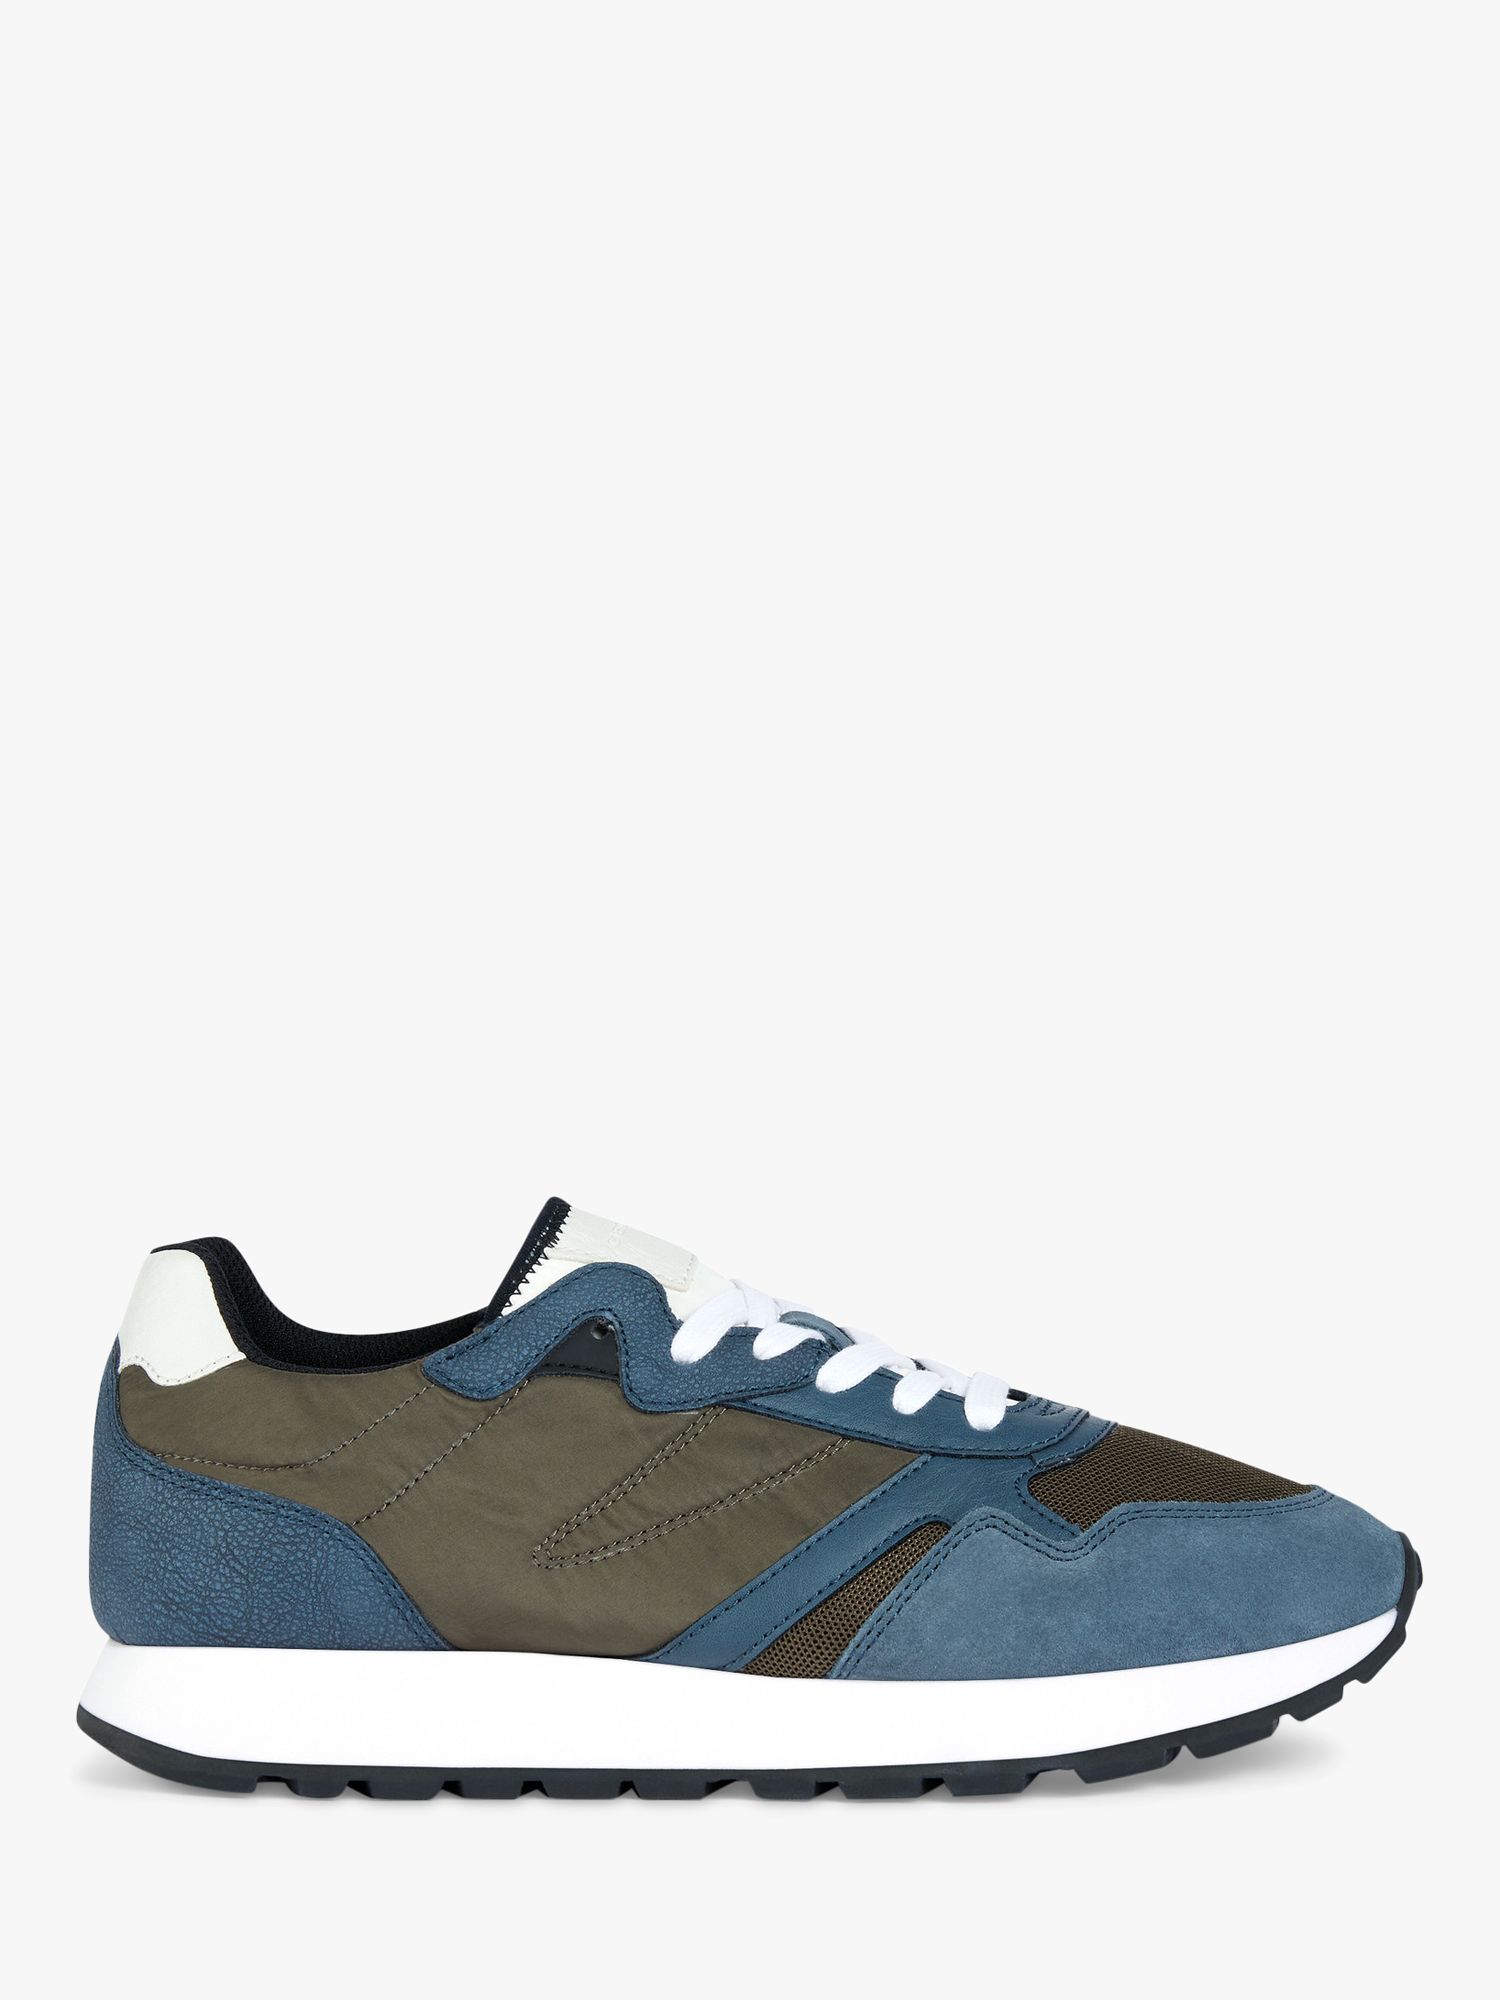 Geox Vicenda Trainers, Olive/Jeans John Lewis & Partners